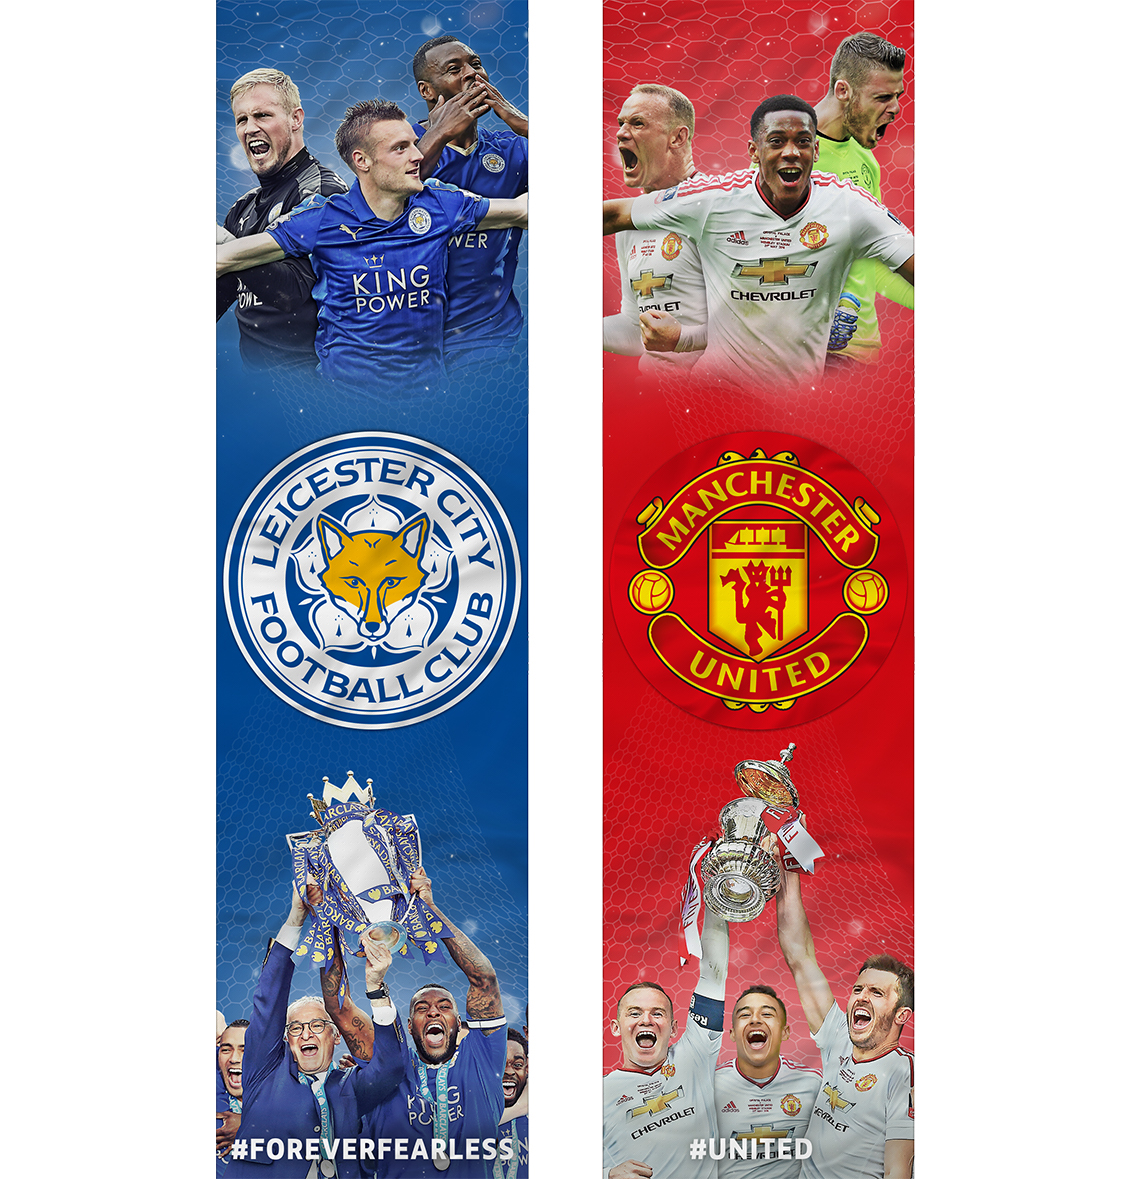 the fa football Manchester United leicester city banners large print community shield Wembley soccer Dynamic